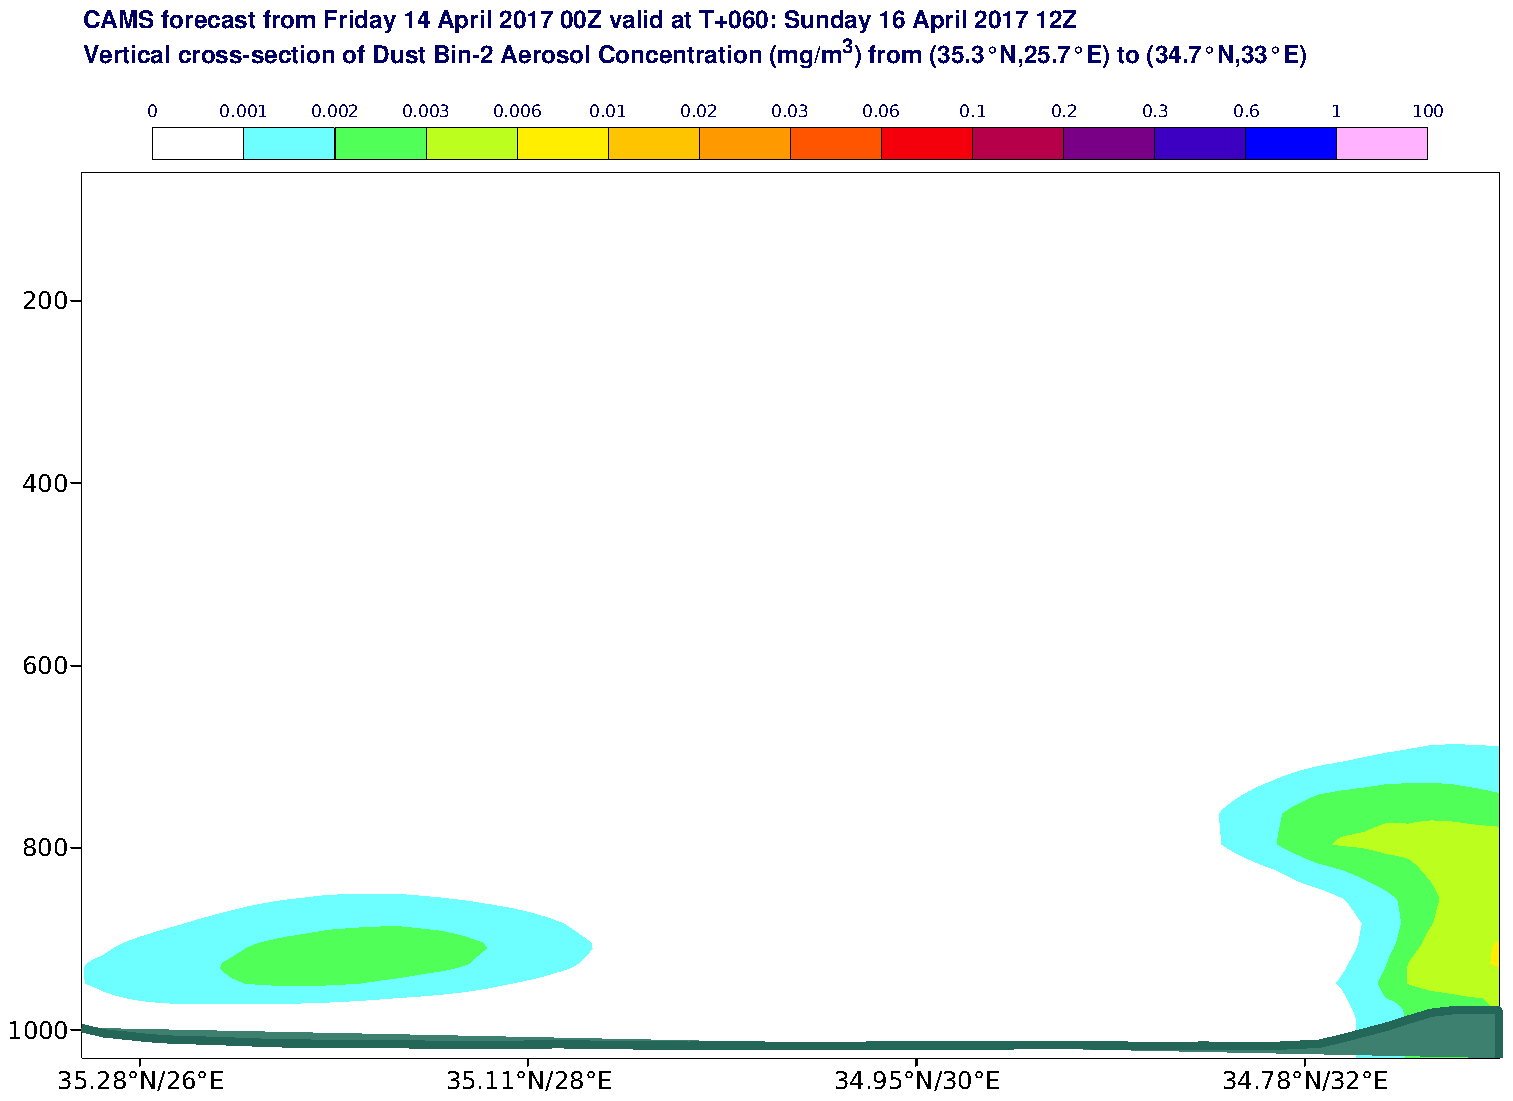 Vertical cross-section of Dust Bin-2 Aerosol Concentration (mg/m3) valid at T60 - 2017-04-16 12:00